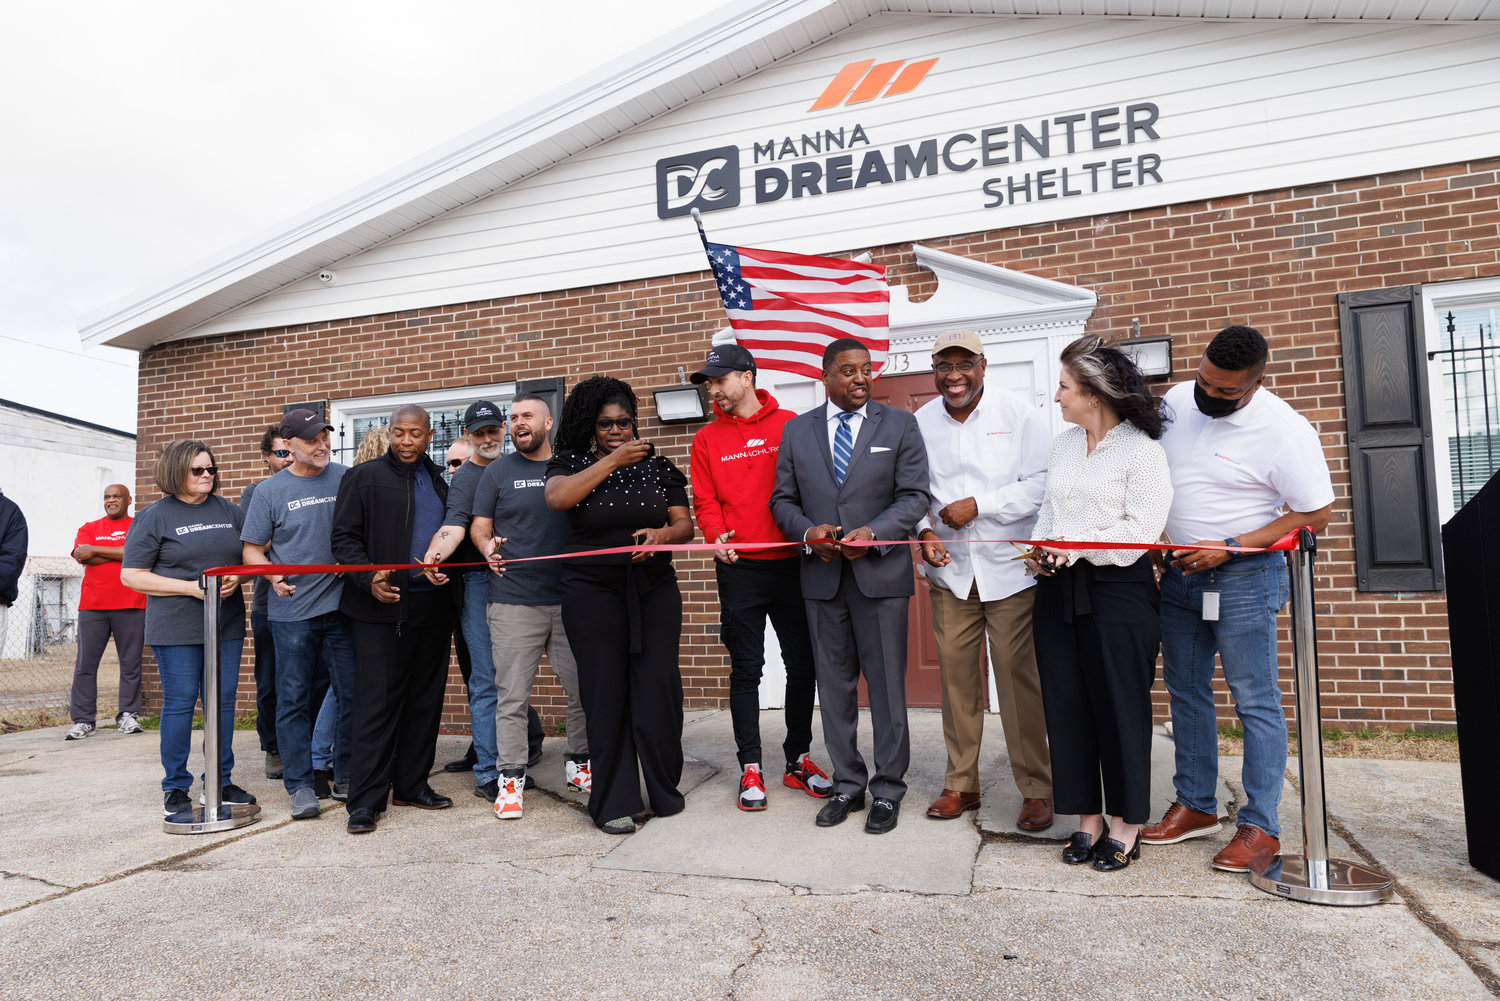 Members of the Fayetteville City Council, Manna Church and Dream Center staff cut a ribbon for the Manna Dream Center Shelter on Friday.